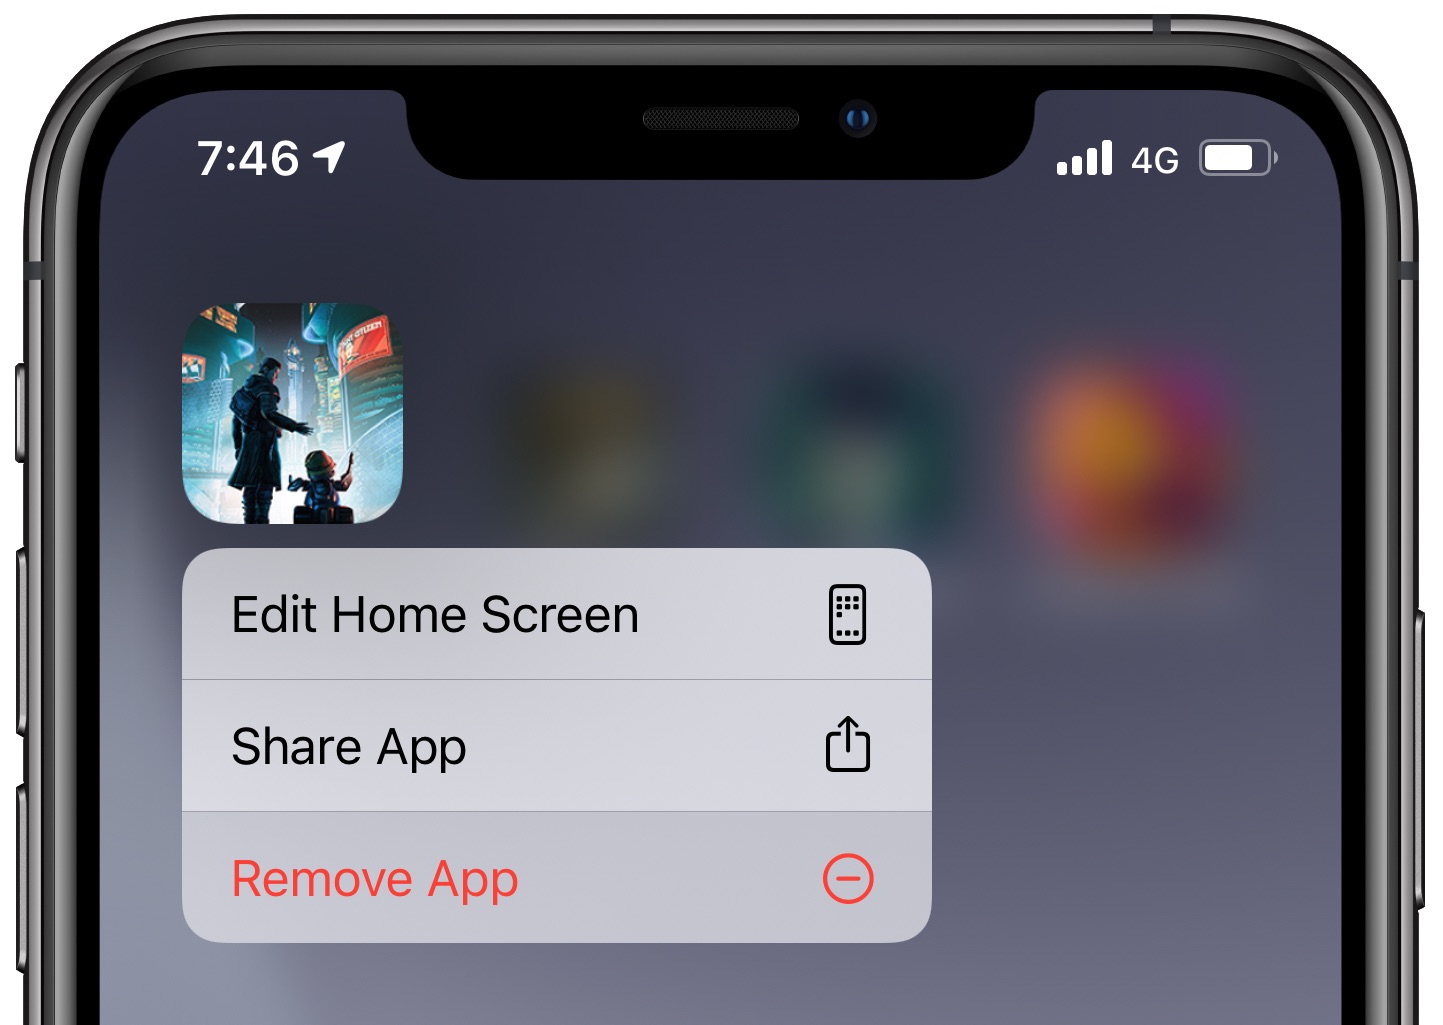 Hide Home screen apps - Remove App option